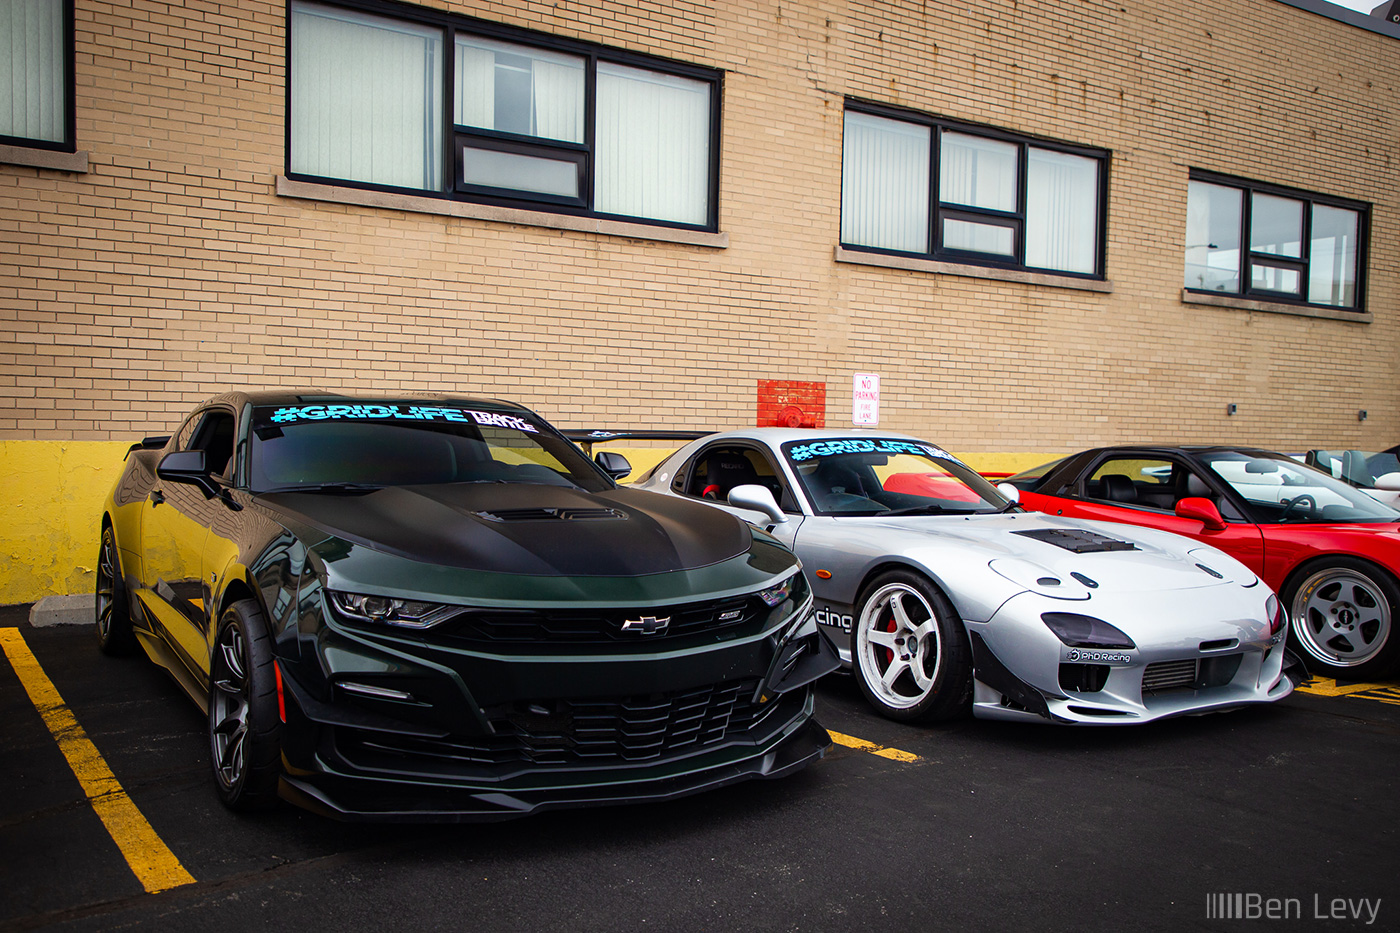 Camaro and RX-7 with GRIDLIFE Crew